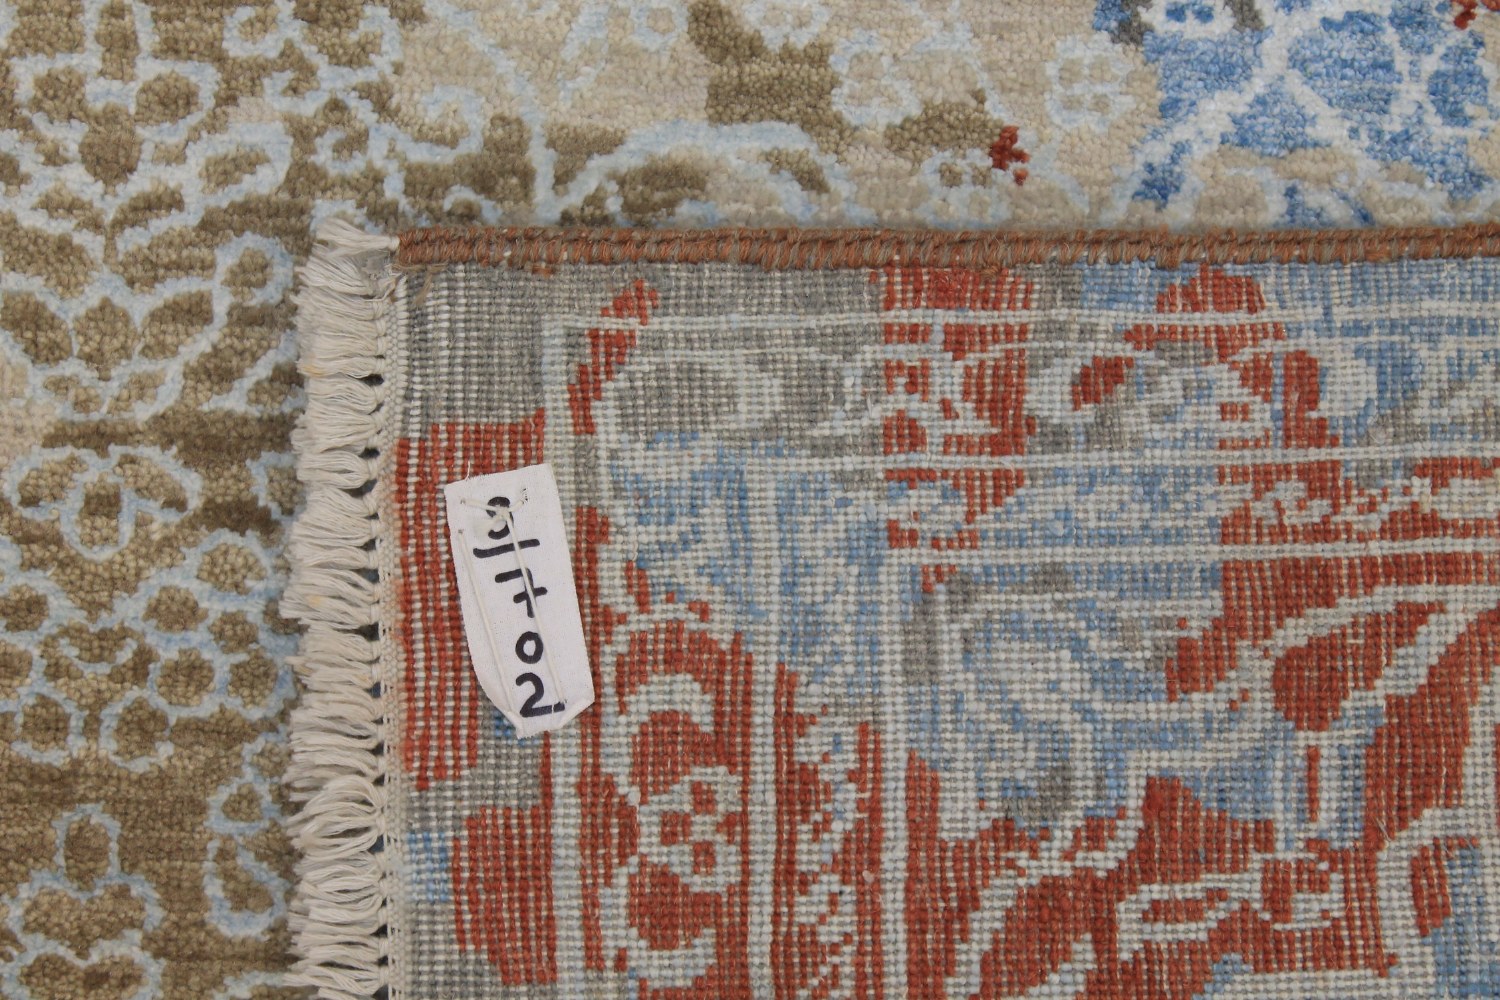 9x12 Modern Hand Knotted Wool Area Rug - MR026299